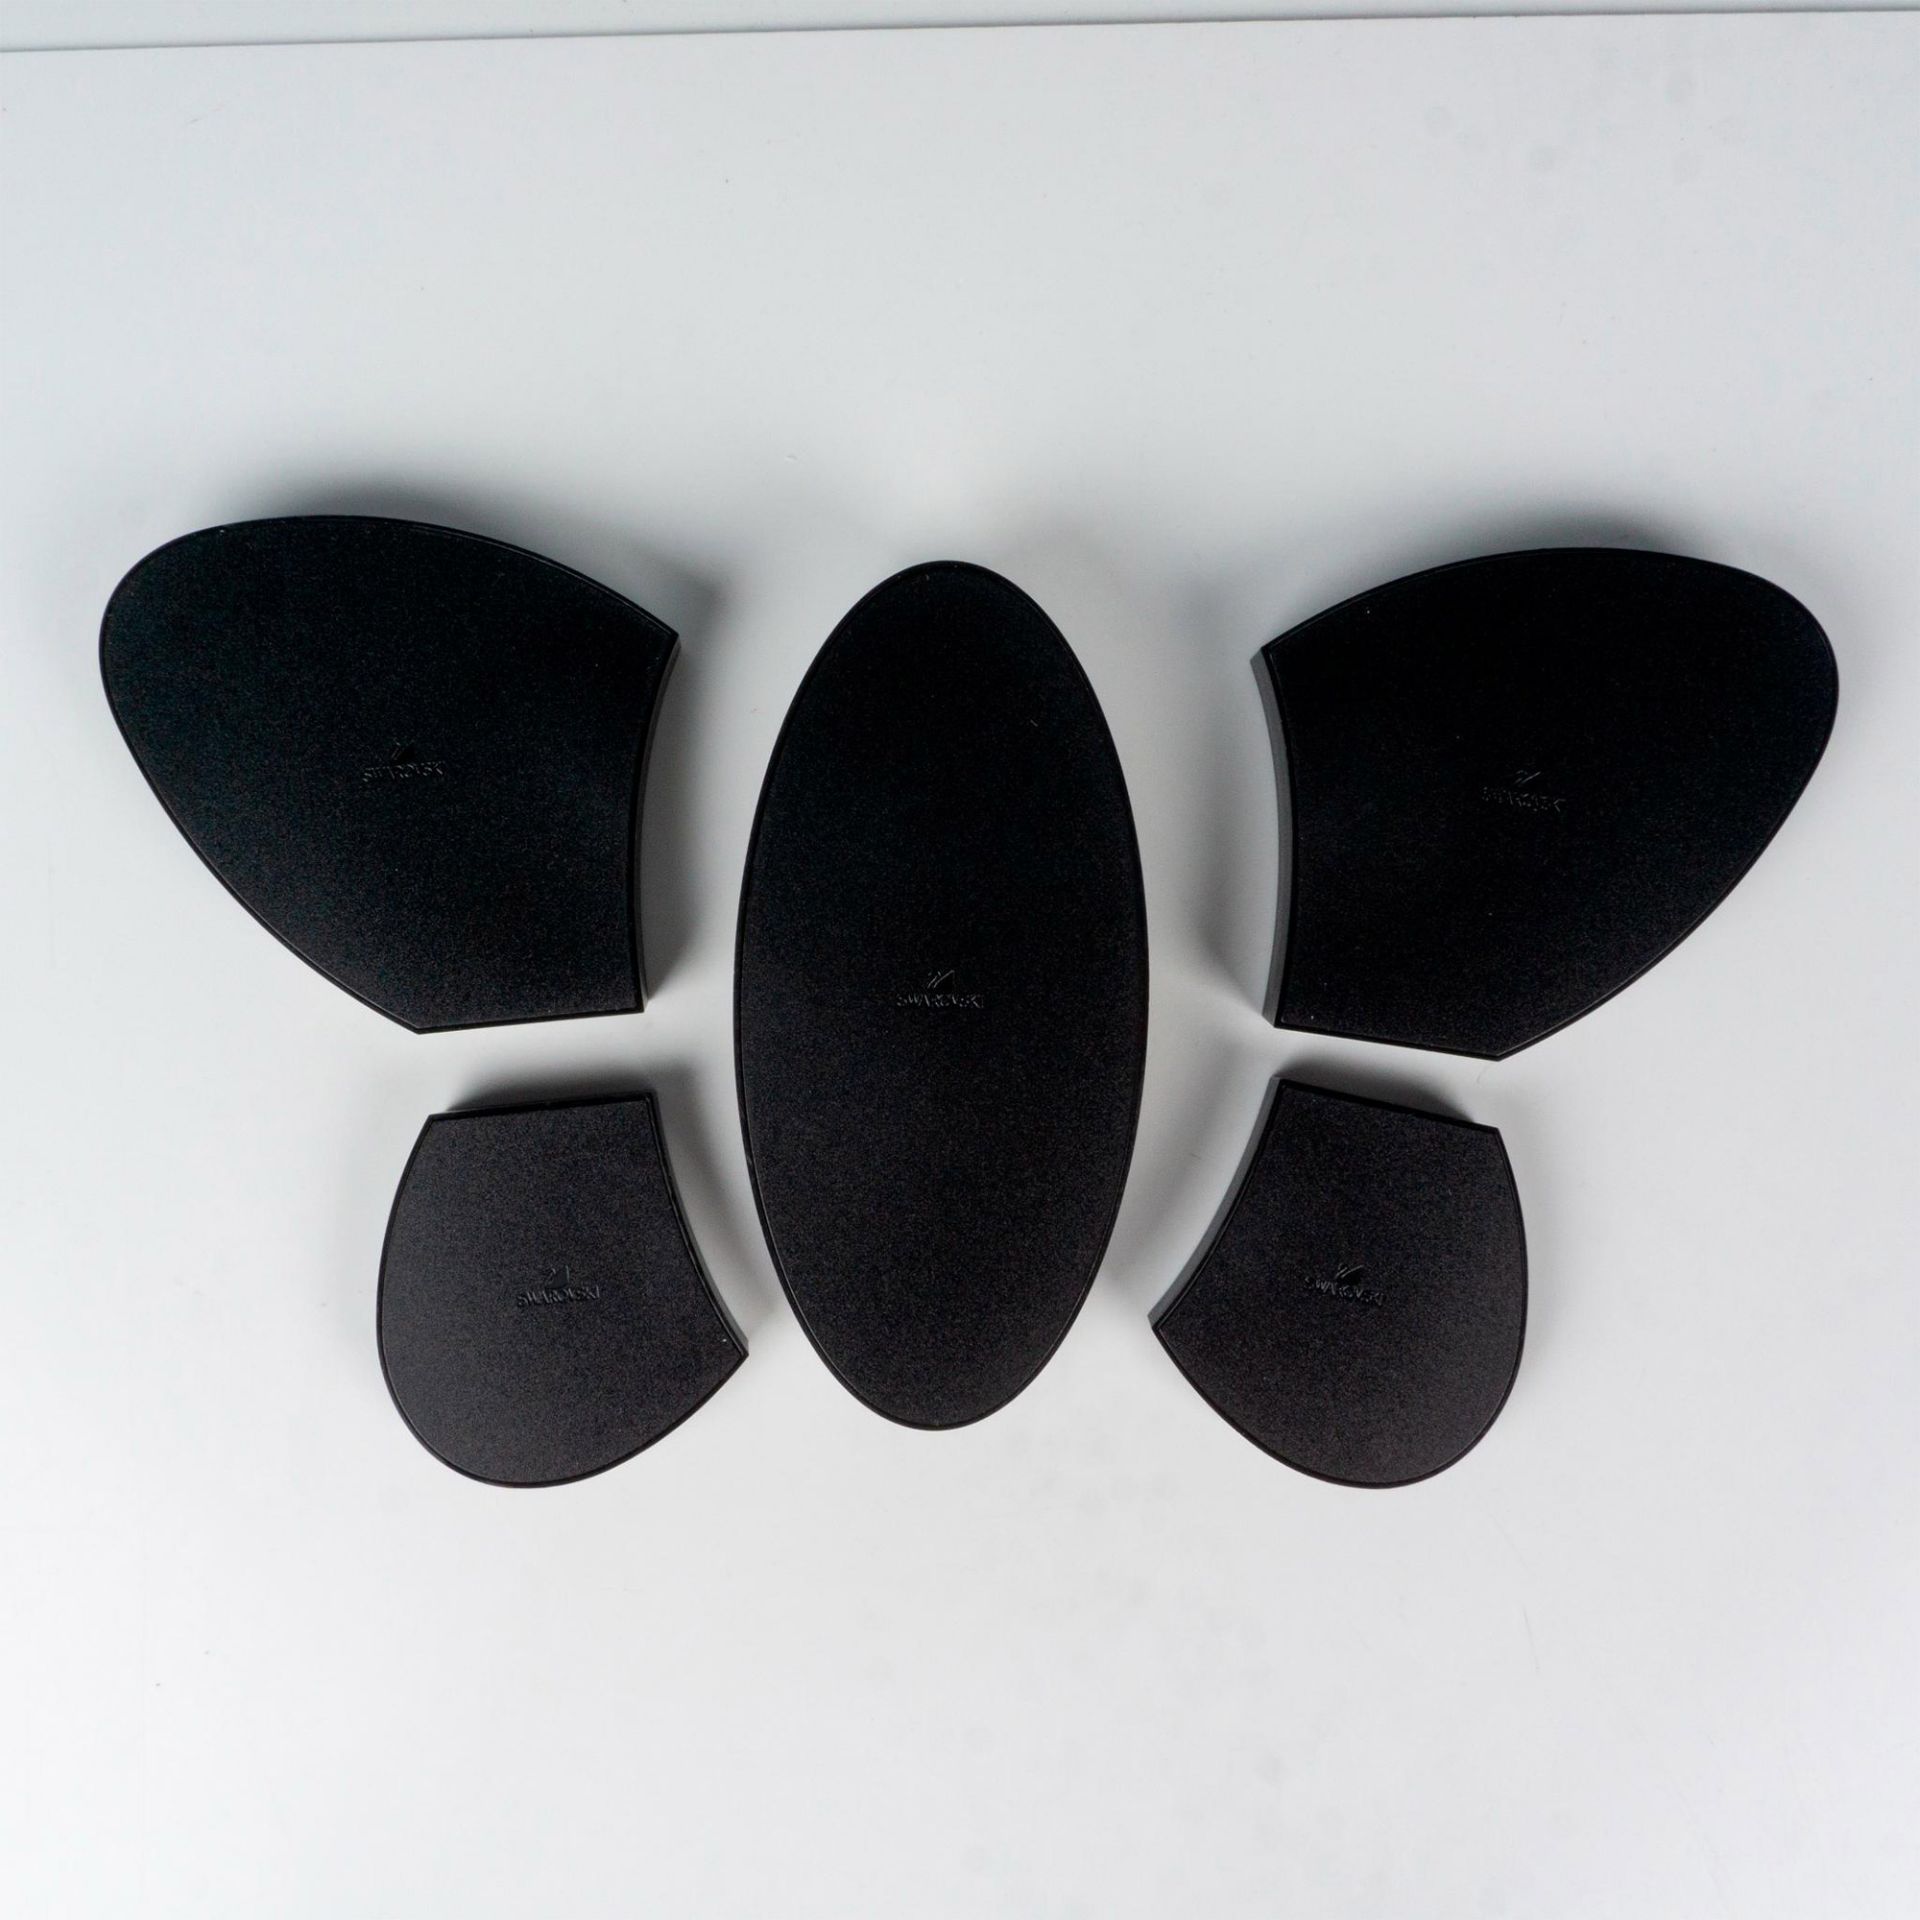 Swarovski Bambi Series Display Stands, Butterfly 981942 - Image 2 of 3